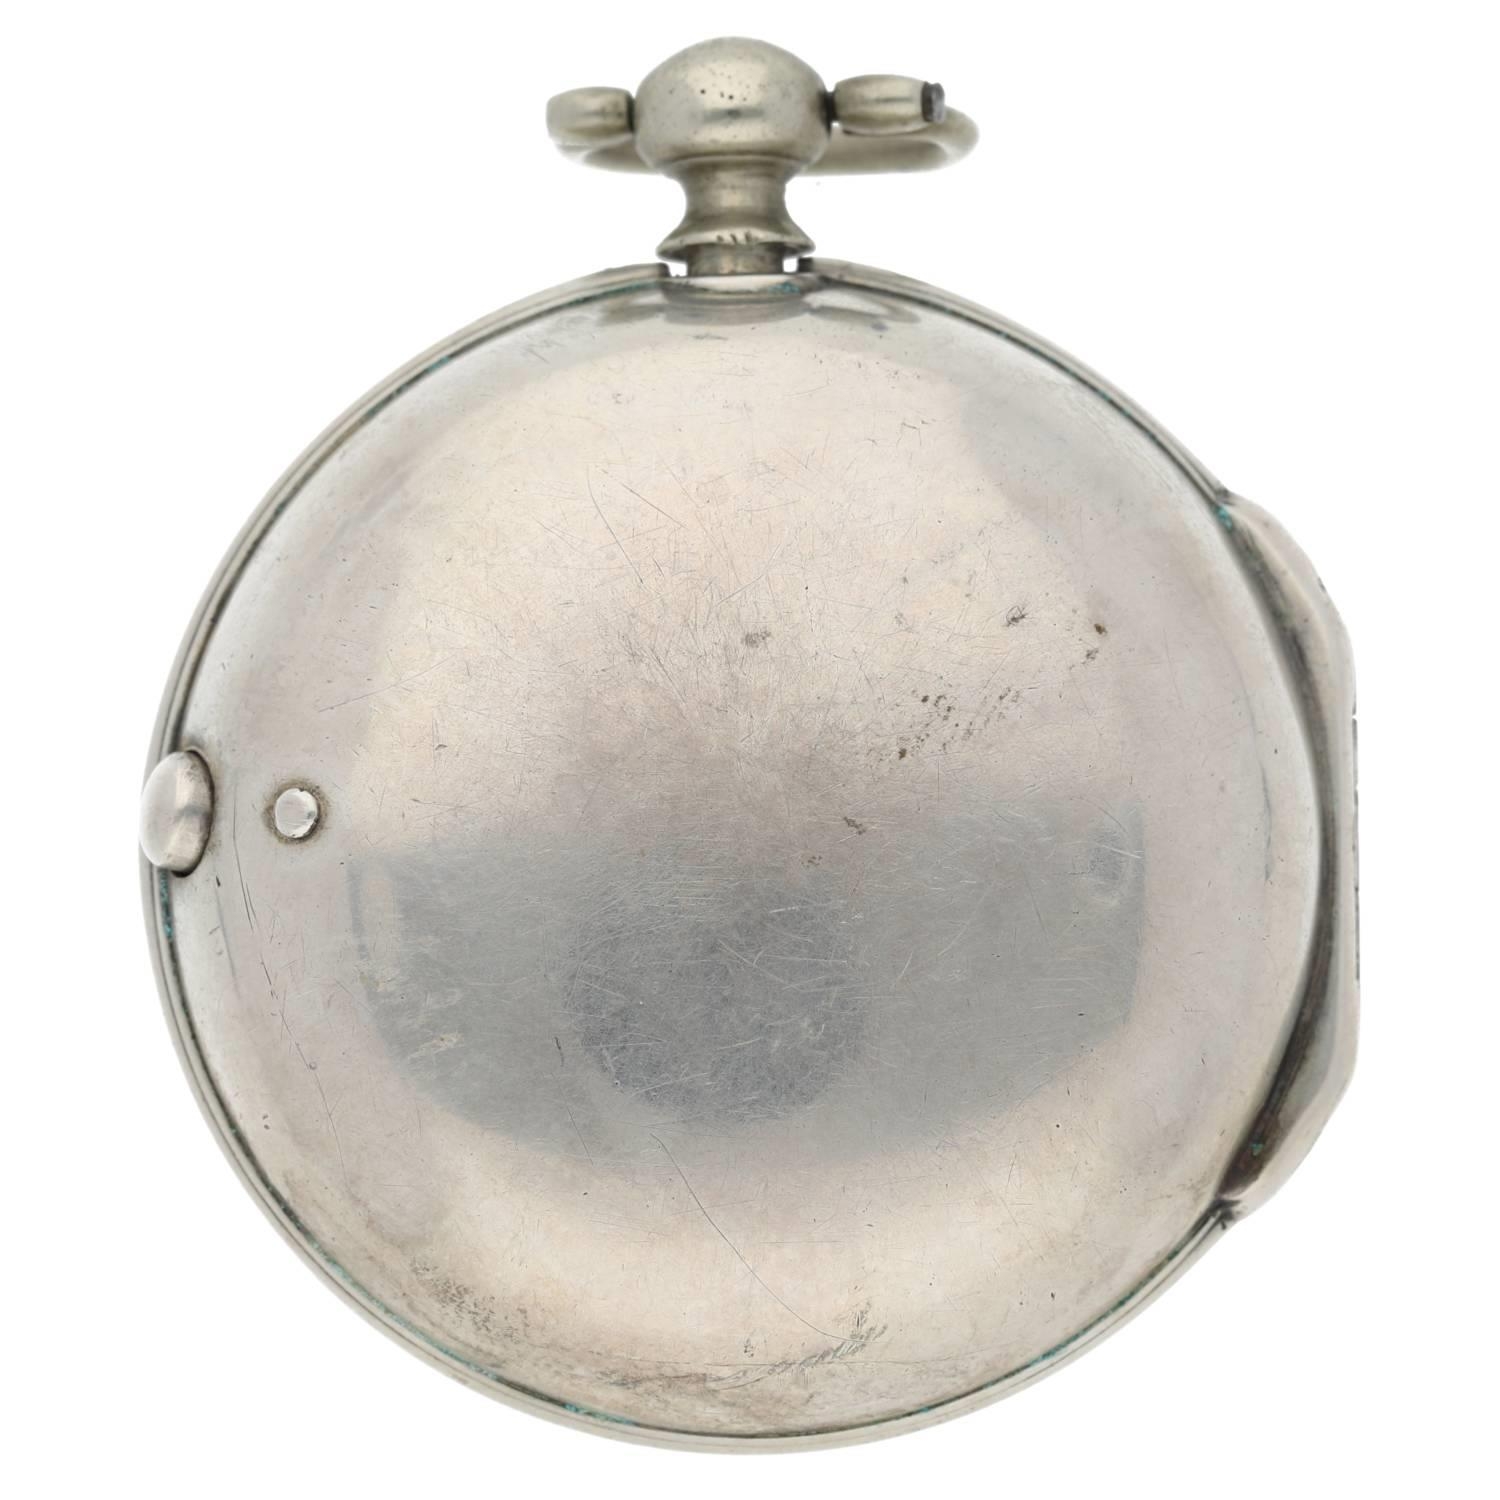 D. Edmonds, Liverpool - English George III silver pair cased verge pocket watch, London 1778, signed - Image 8 of 10